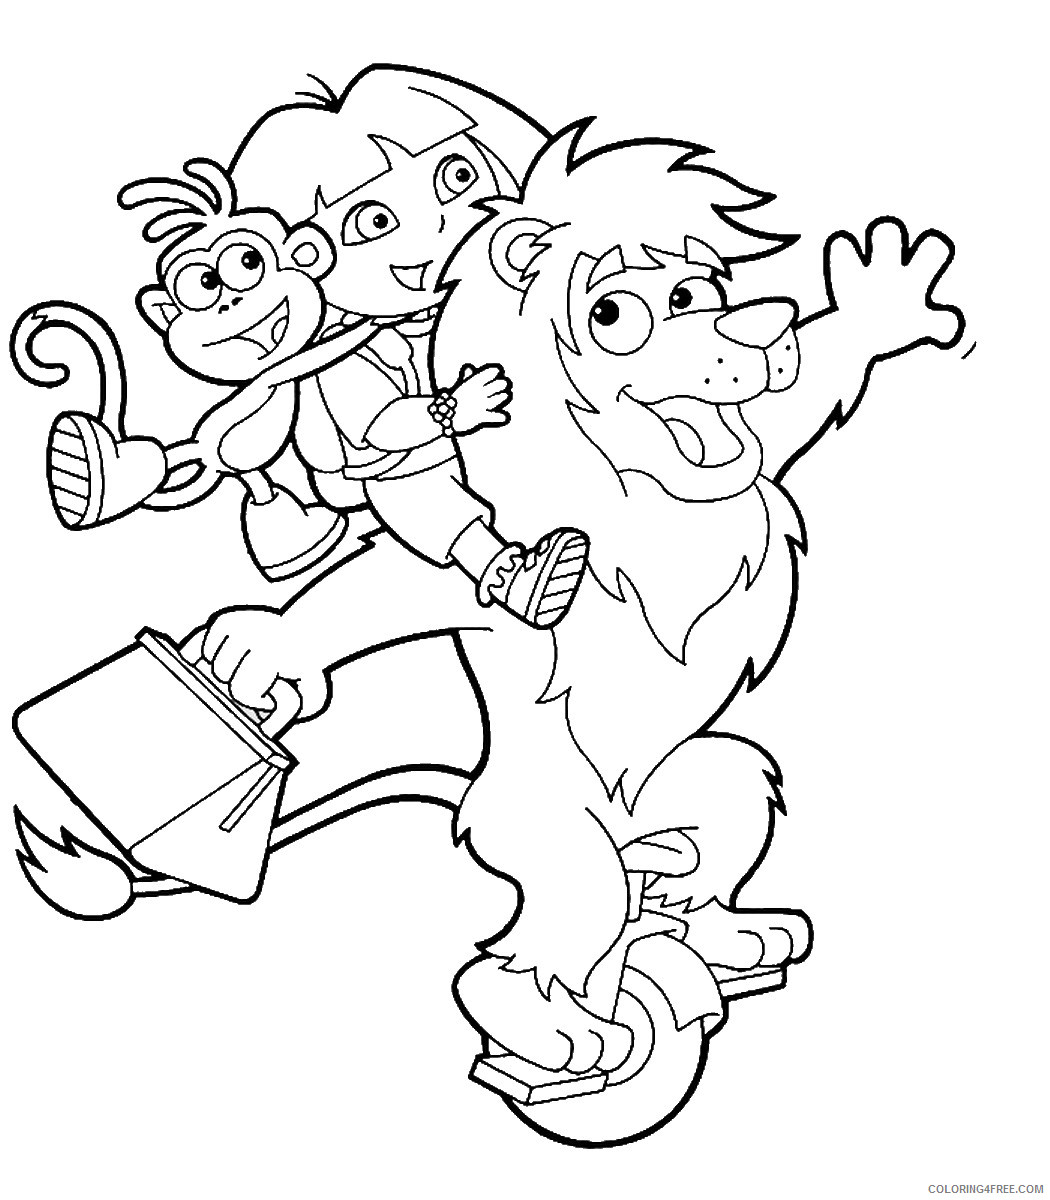 Dora the Explorer Coloring Pages Cartoons cl_dora50 Printable 2020 2634 Coloring4free